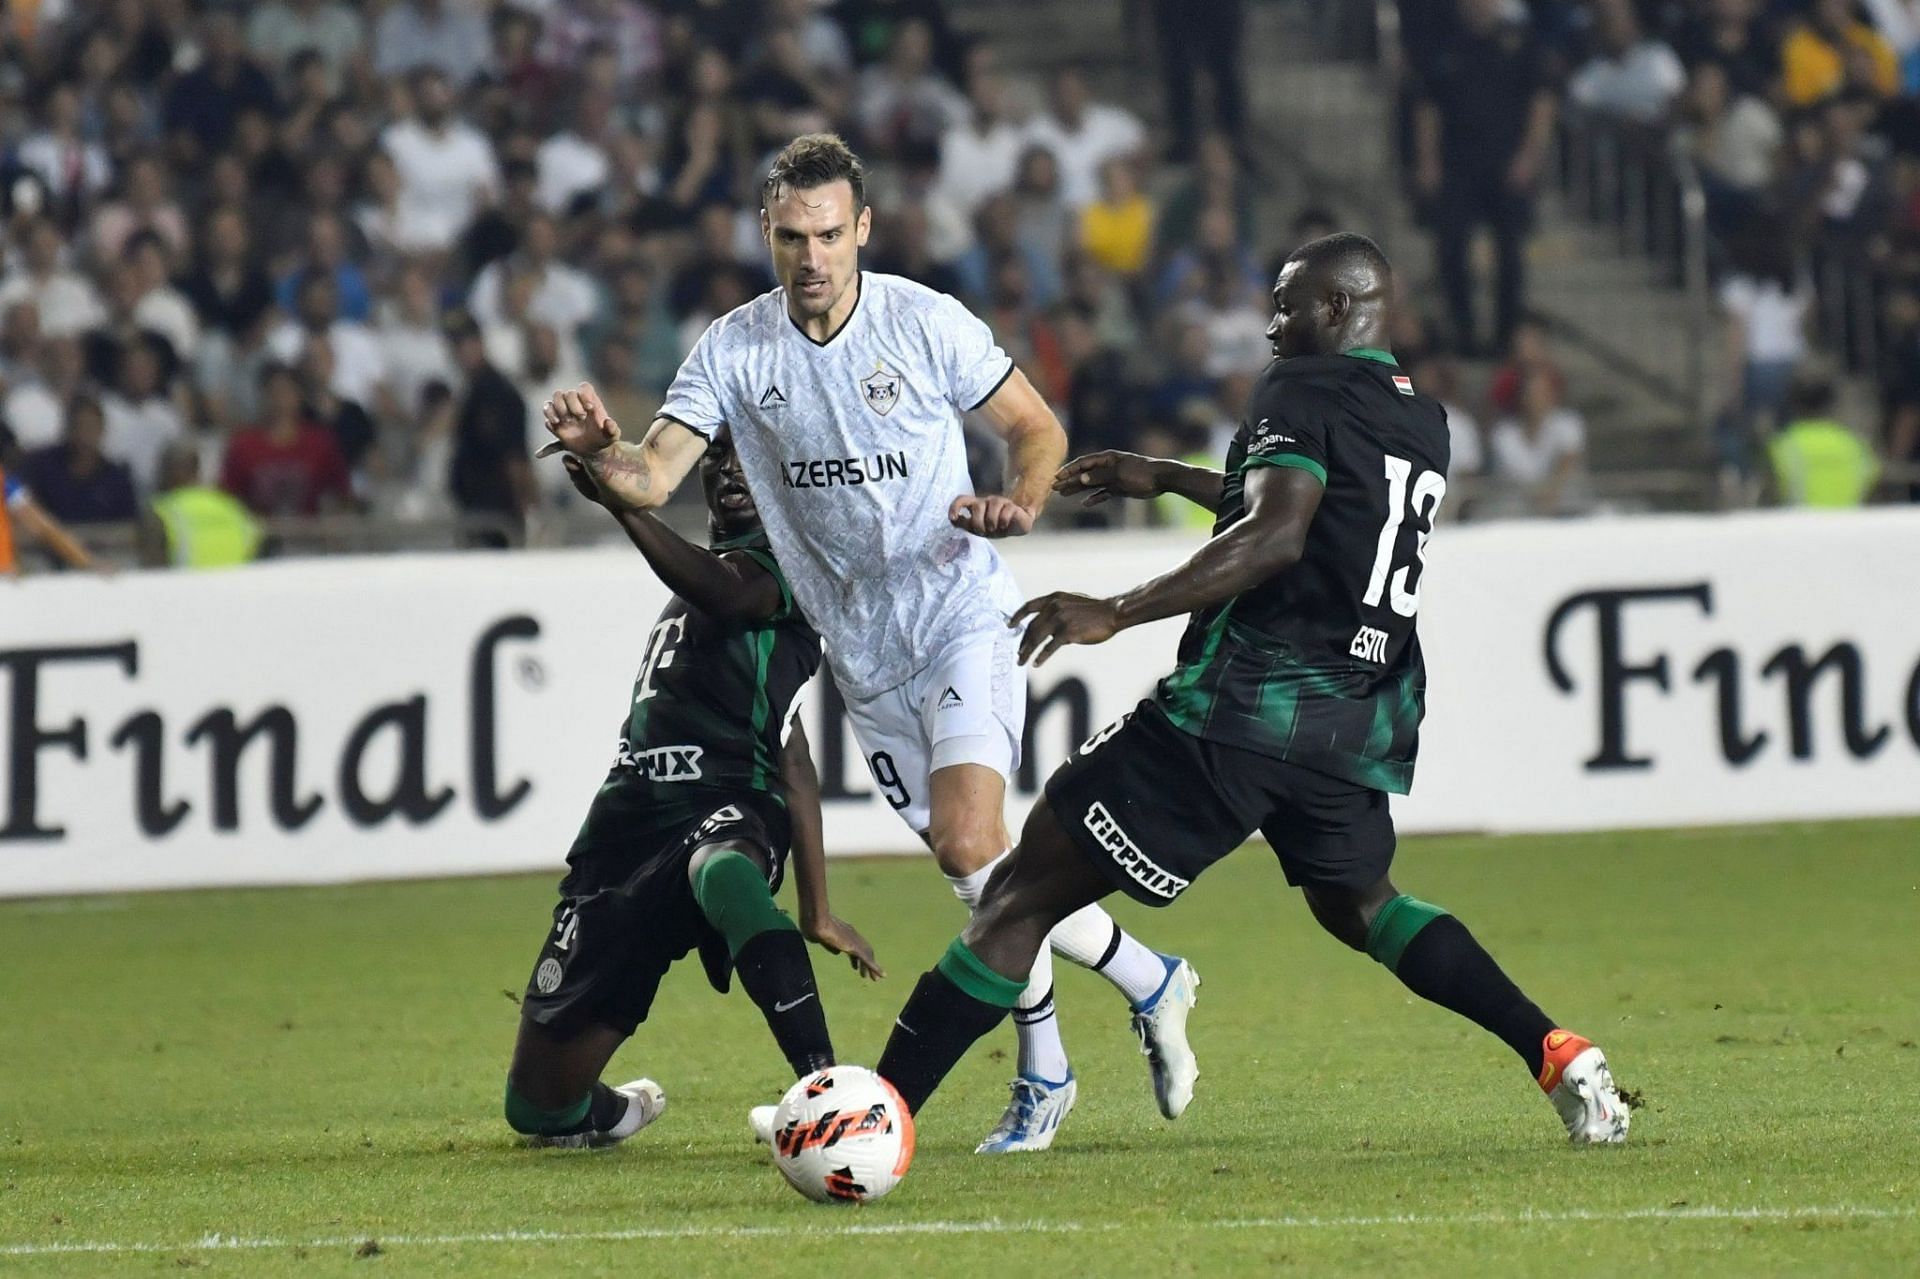 Ferencvaros and Qarabag meet in a must-win Champions League qualifying fixture on Tuesday